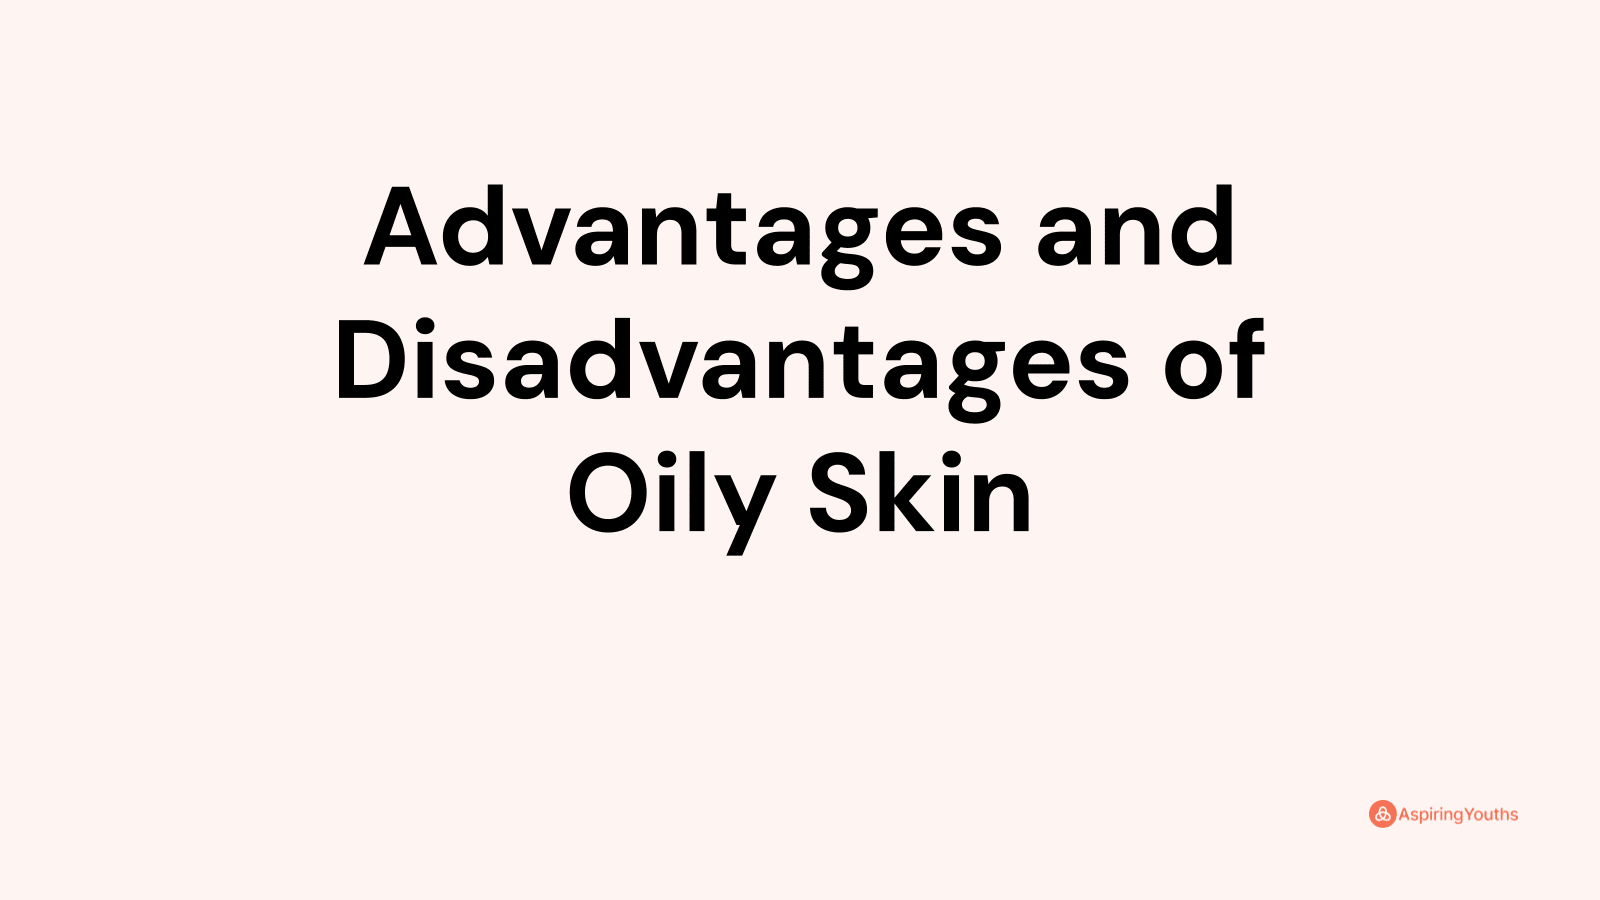 Advantages and disadvantages of Oily Skin